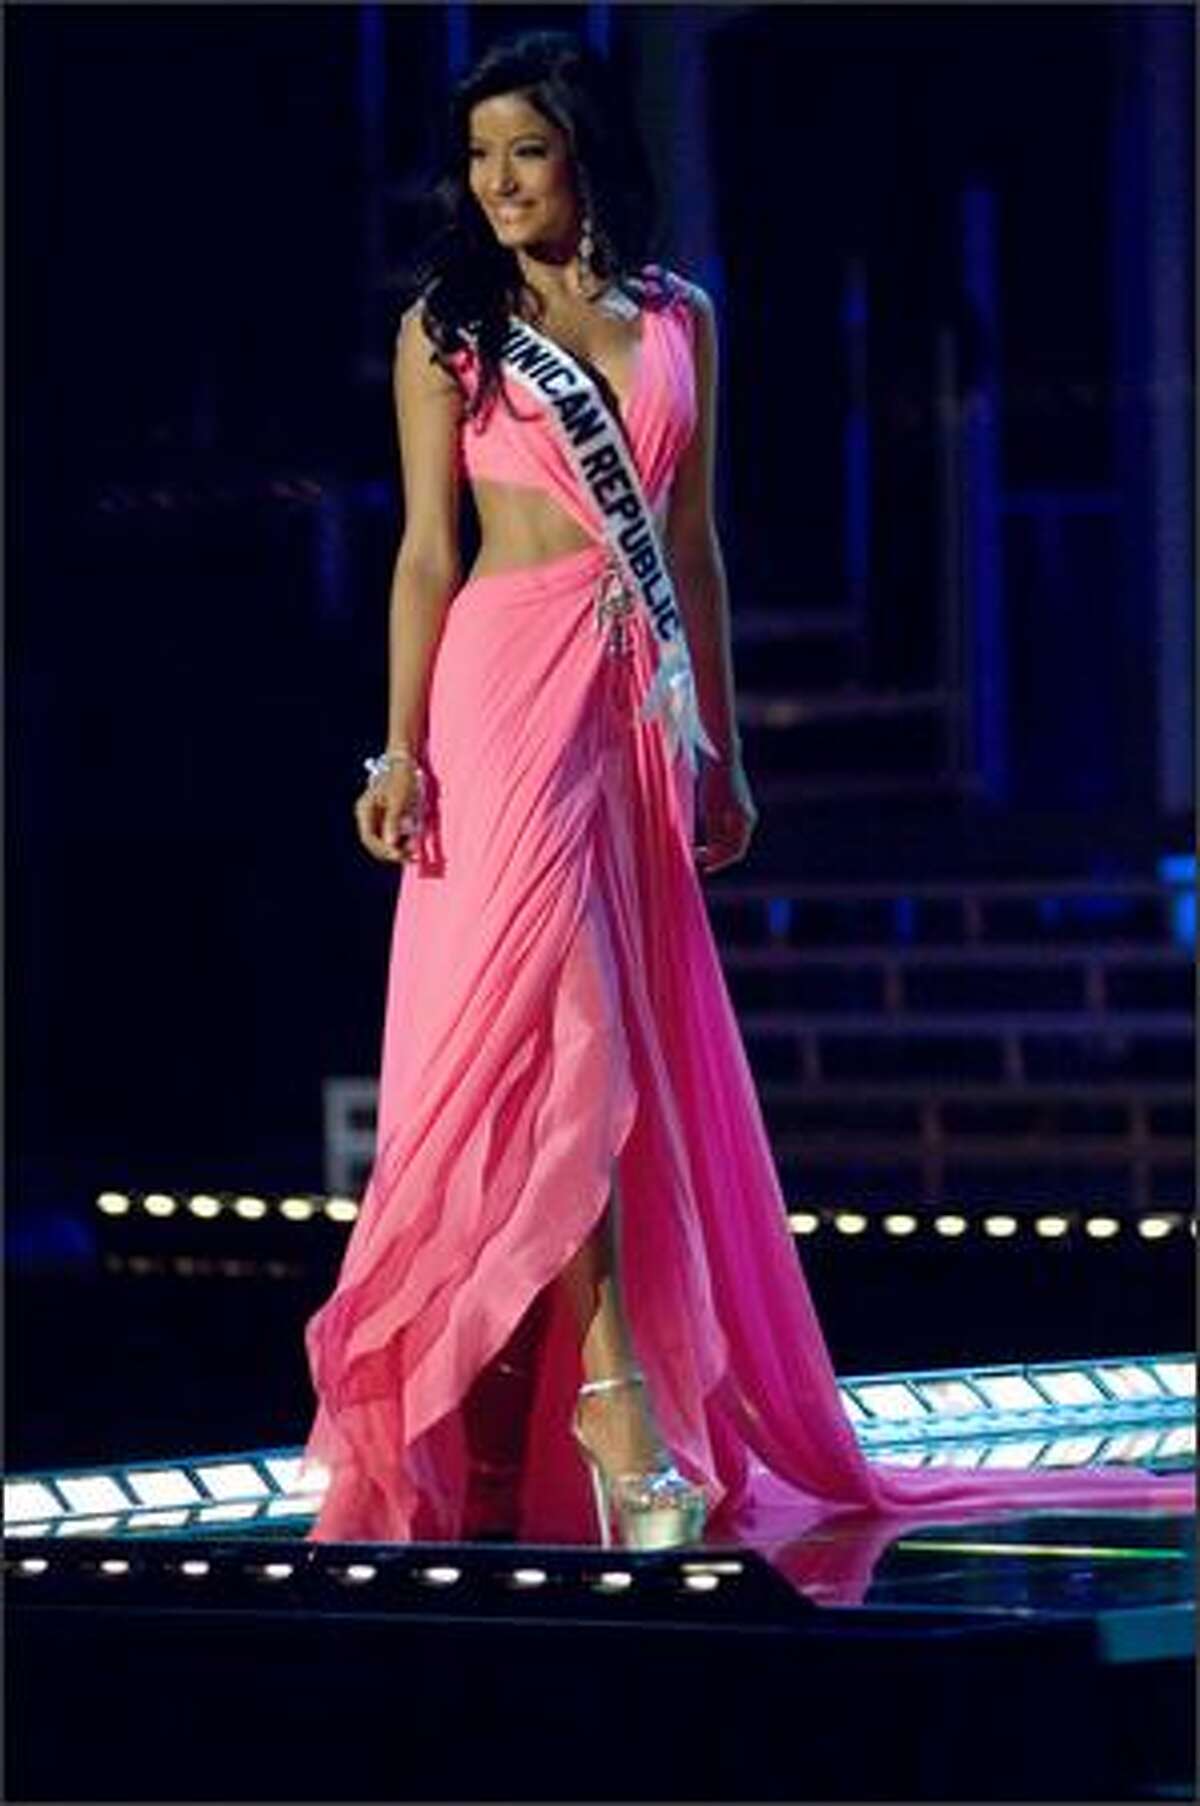 Massiel Taveras, Miss Dominican Republic 2007, competes in an evening gown of her choice during the 2007 Miss Universe Presentation Show at Auditorio Nacional in Mexico City on May 23. During the Presentation Show, each is judged by a preliminary panel of judges in individual interview, swimsuit and evening gown categories. The scores will be tallied and the top 15 contestants will be announced during the broadcast of the finals on May 28 (9 p.m. Pacific, tape-delayed).